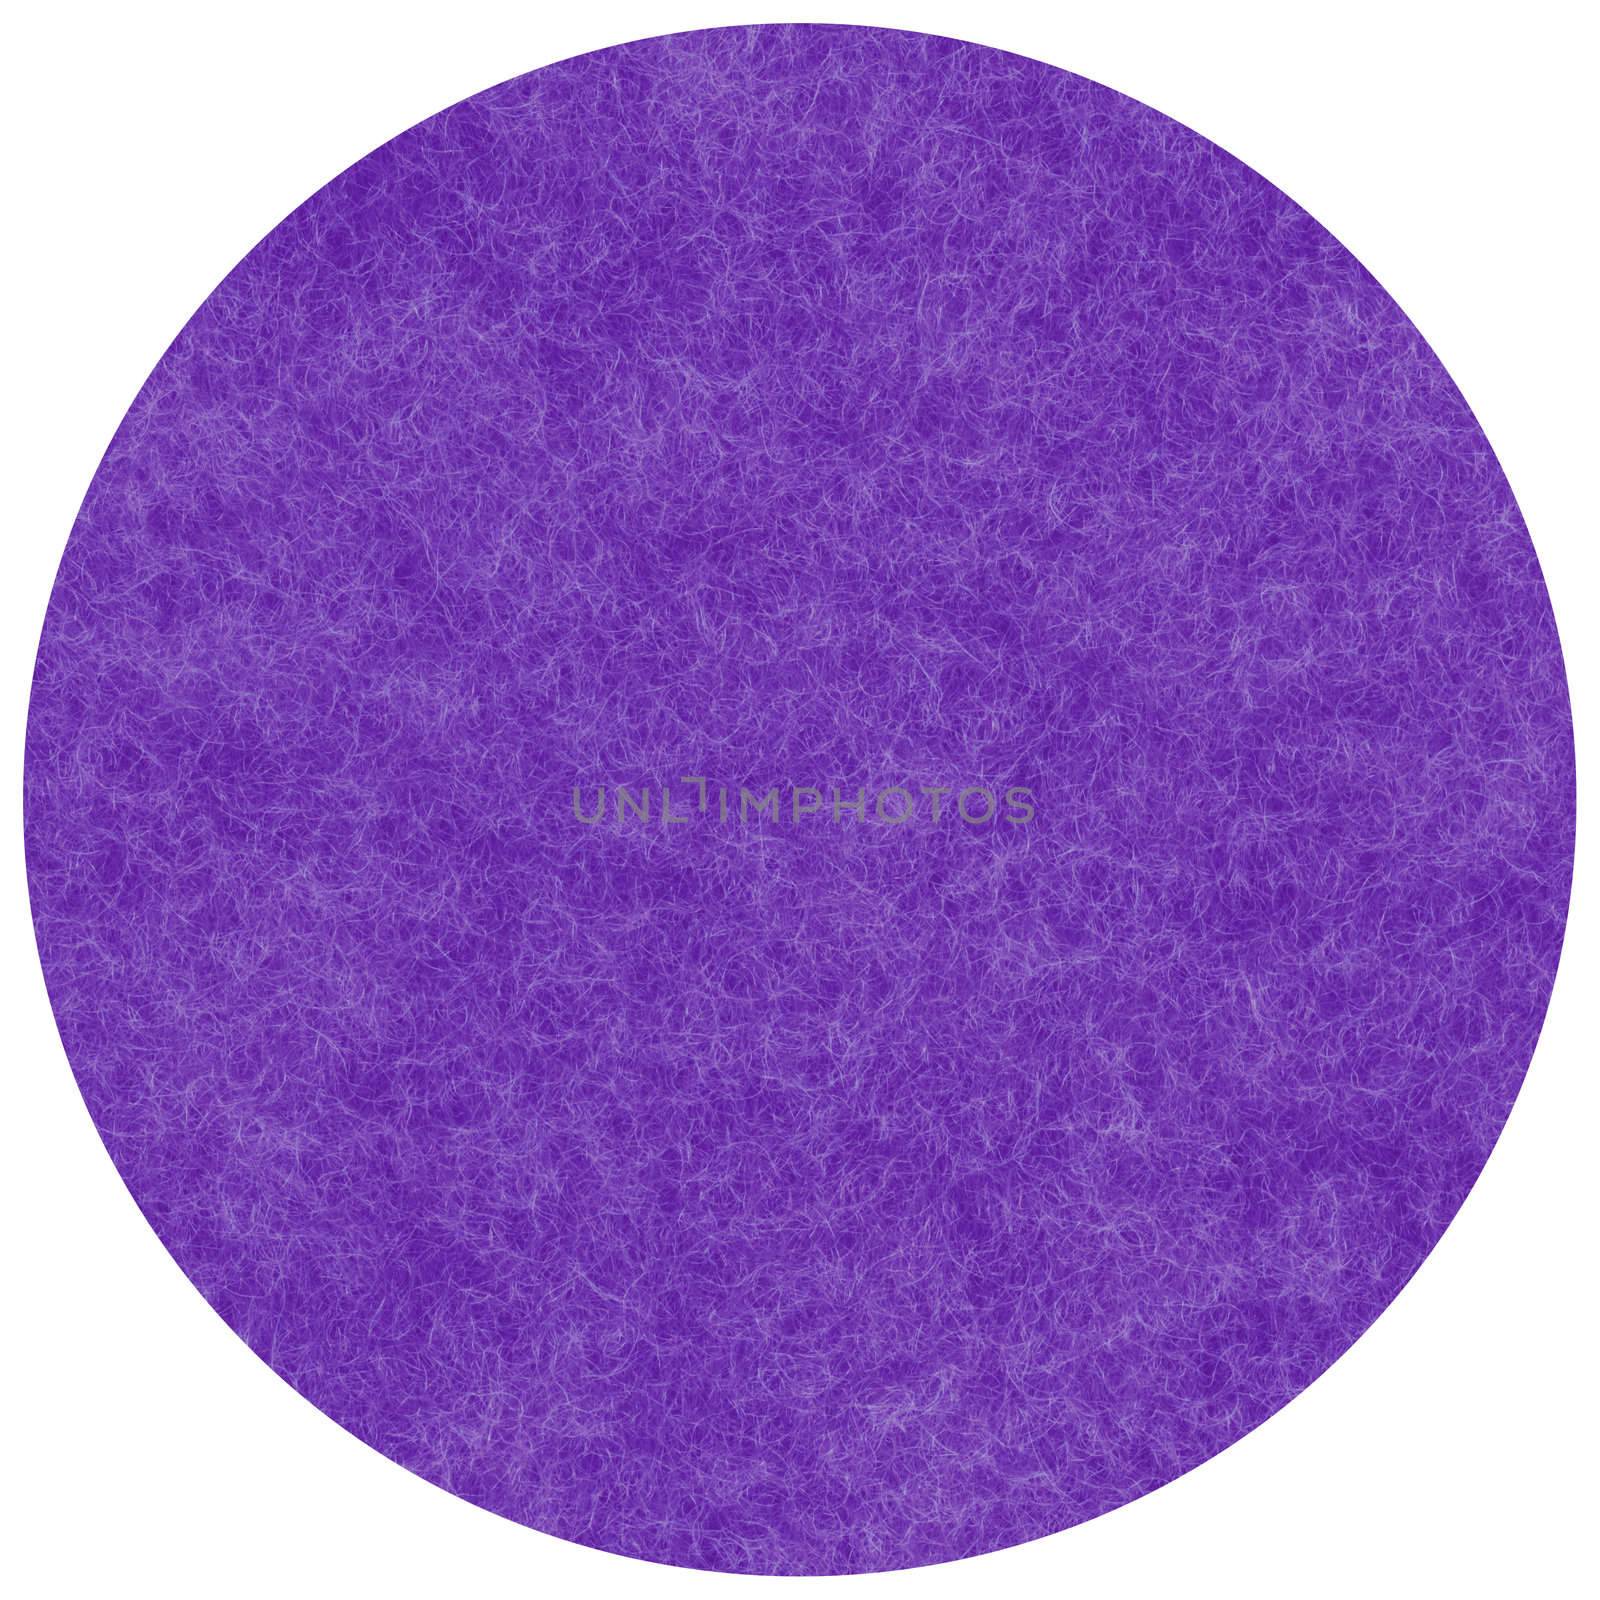 Natural woollen fabric: a violet mohair, round, macro